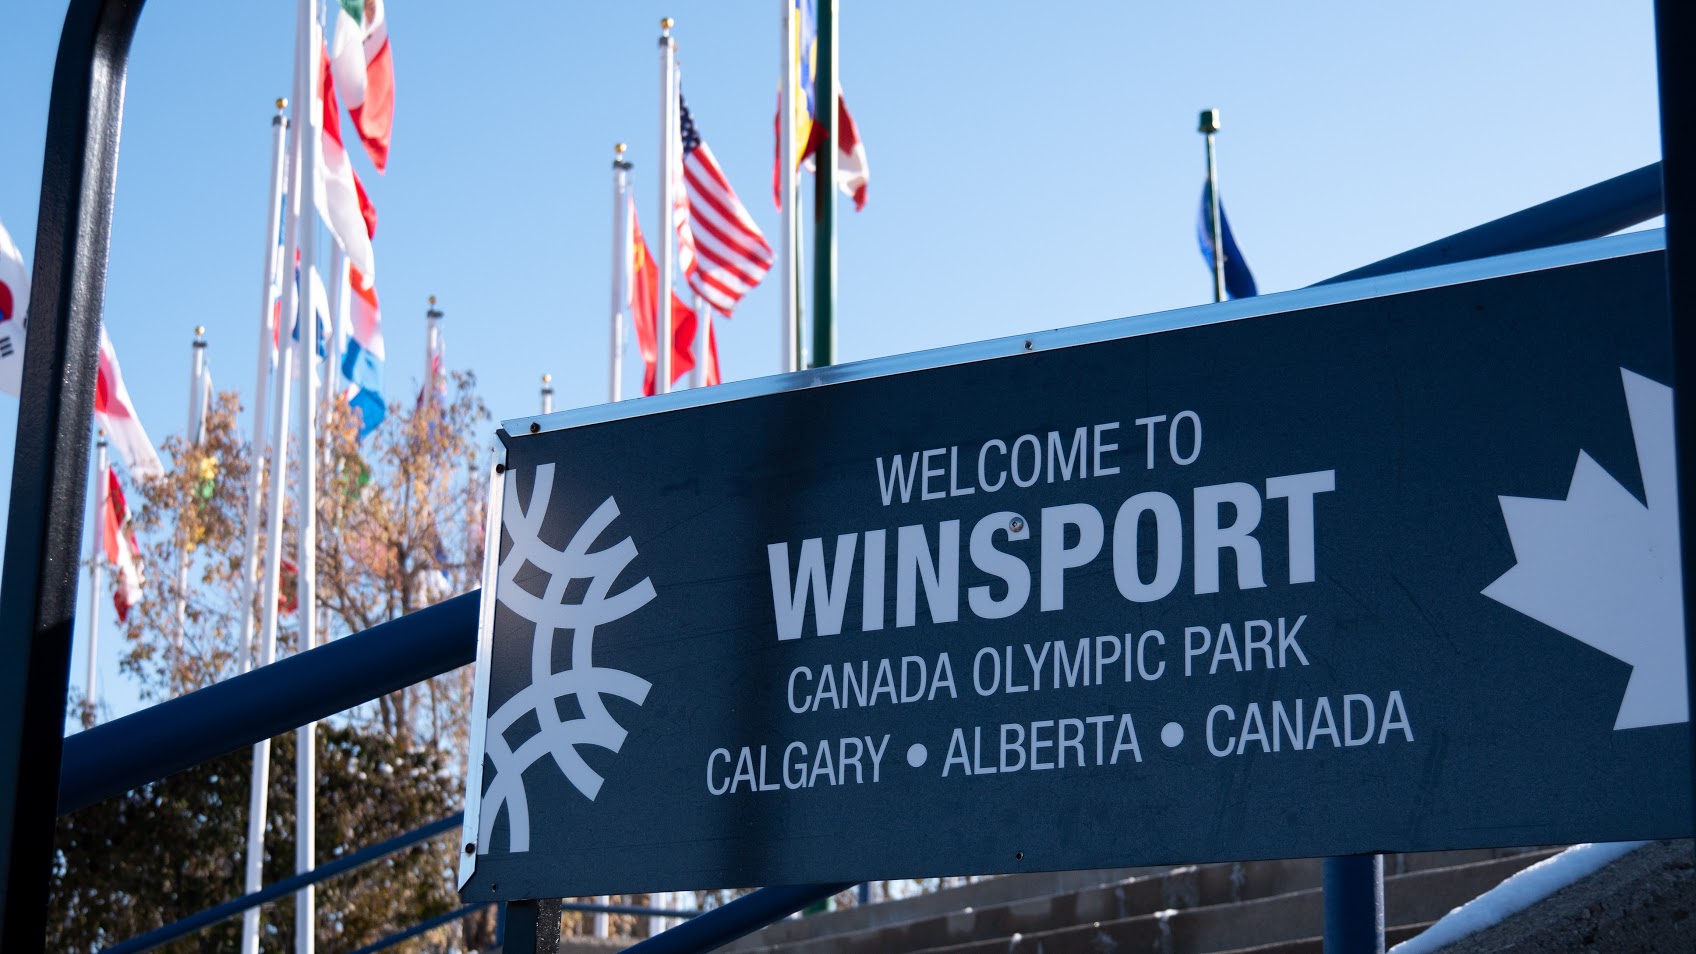 WinSport to offer inclusive participation in wheelchair sport activities